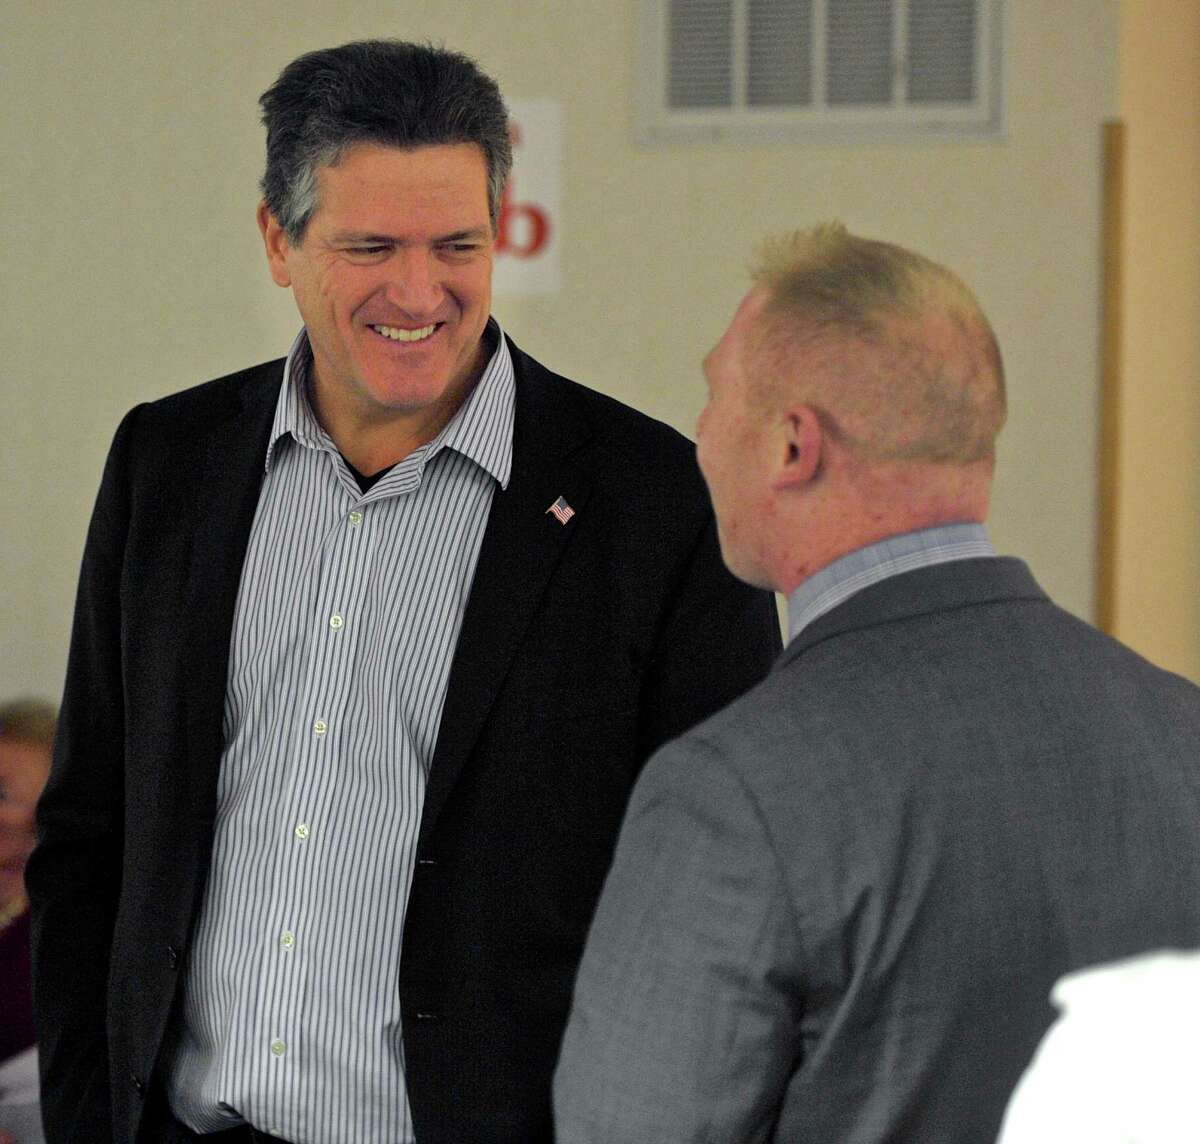 August Wolf, of Stamford, talks with State Rep. Stephen Harding, of Brookfield, at the Connecticut Republican Party Presidential Straw Poll earlier this year.